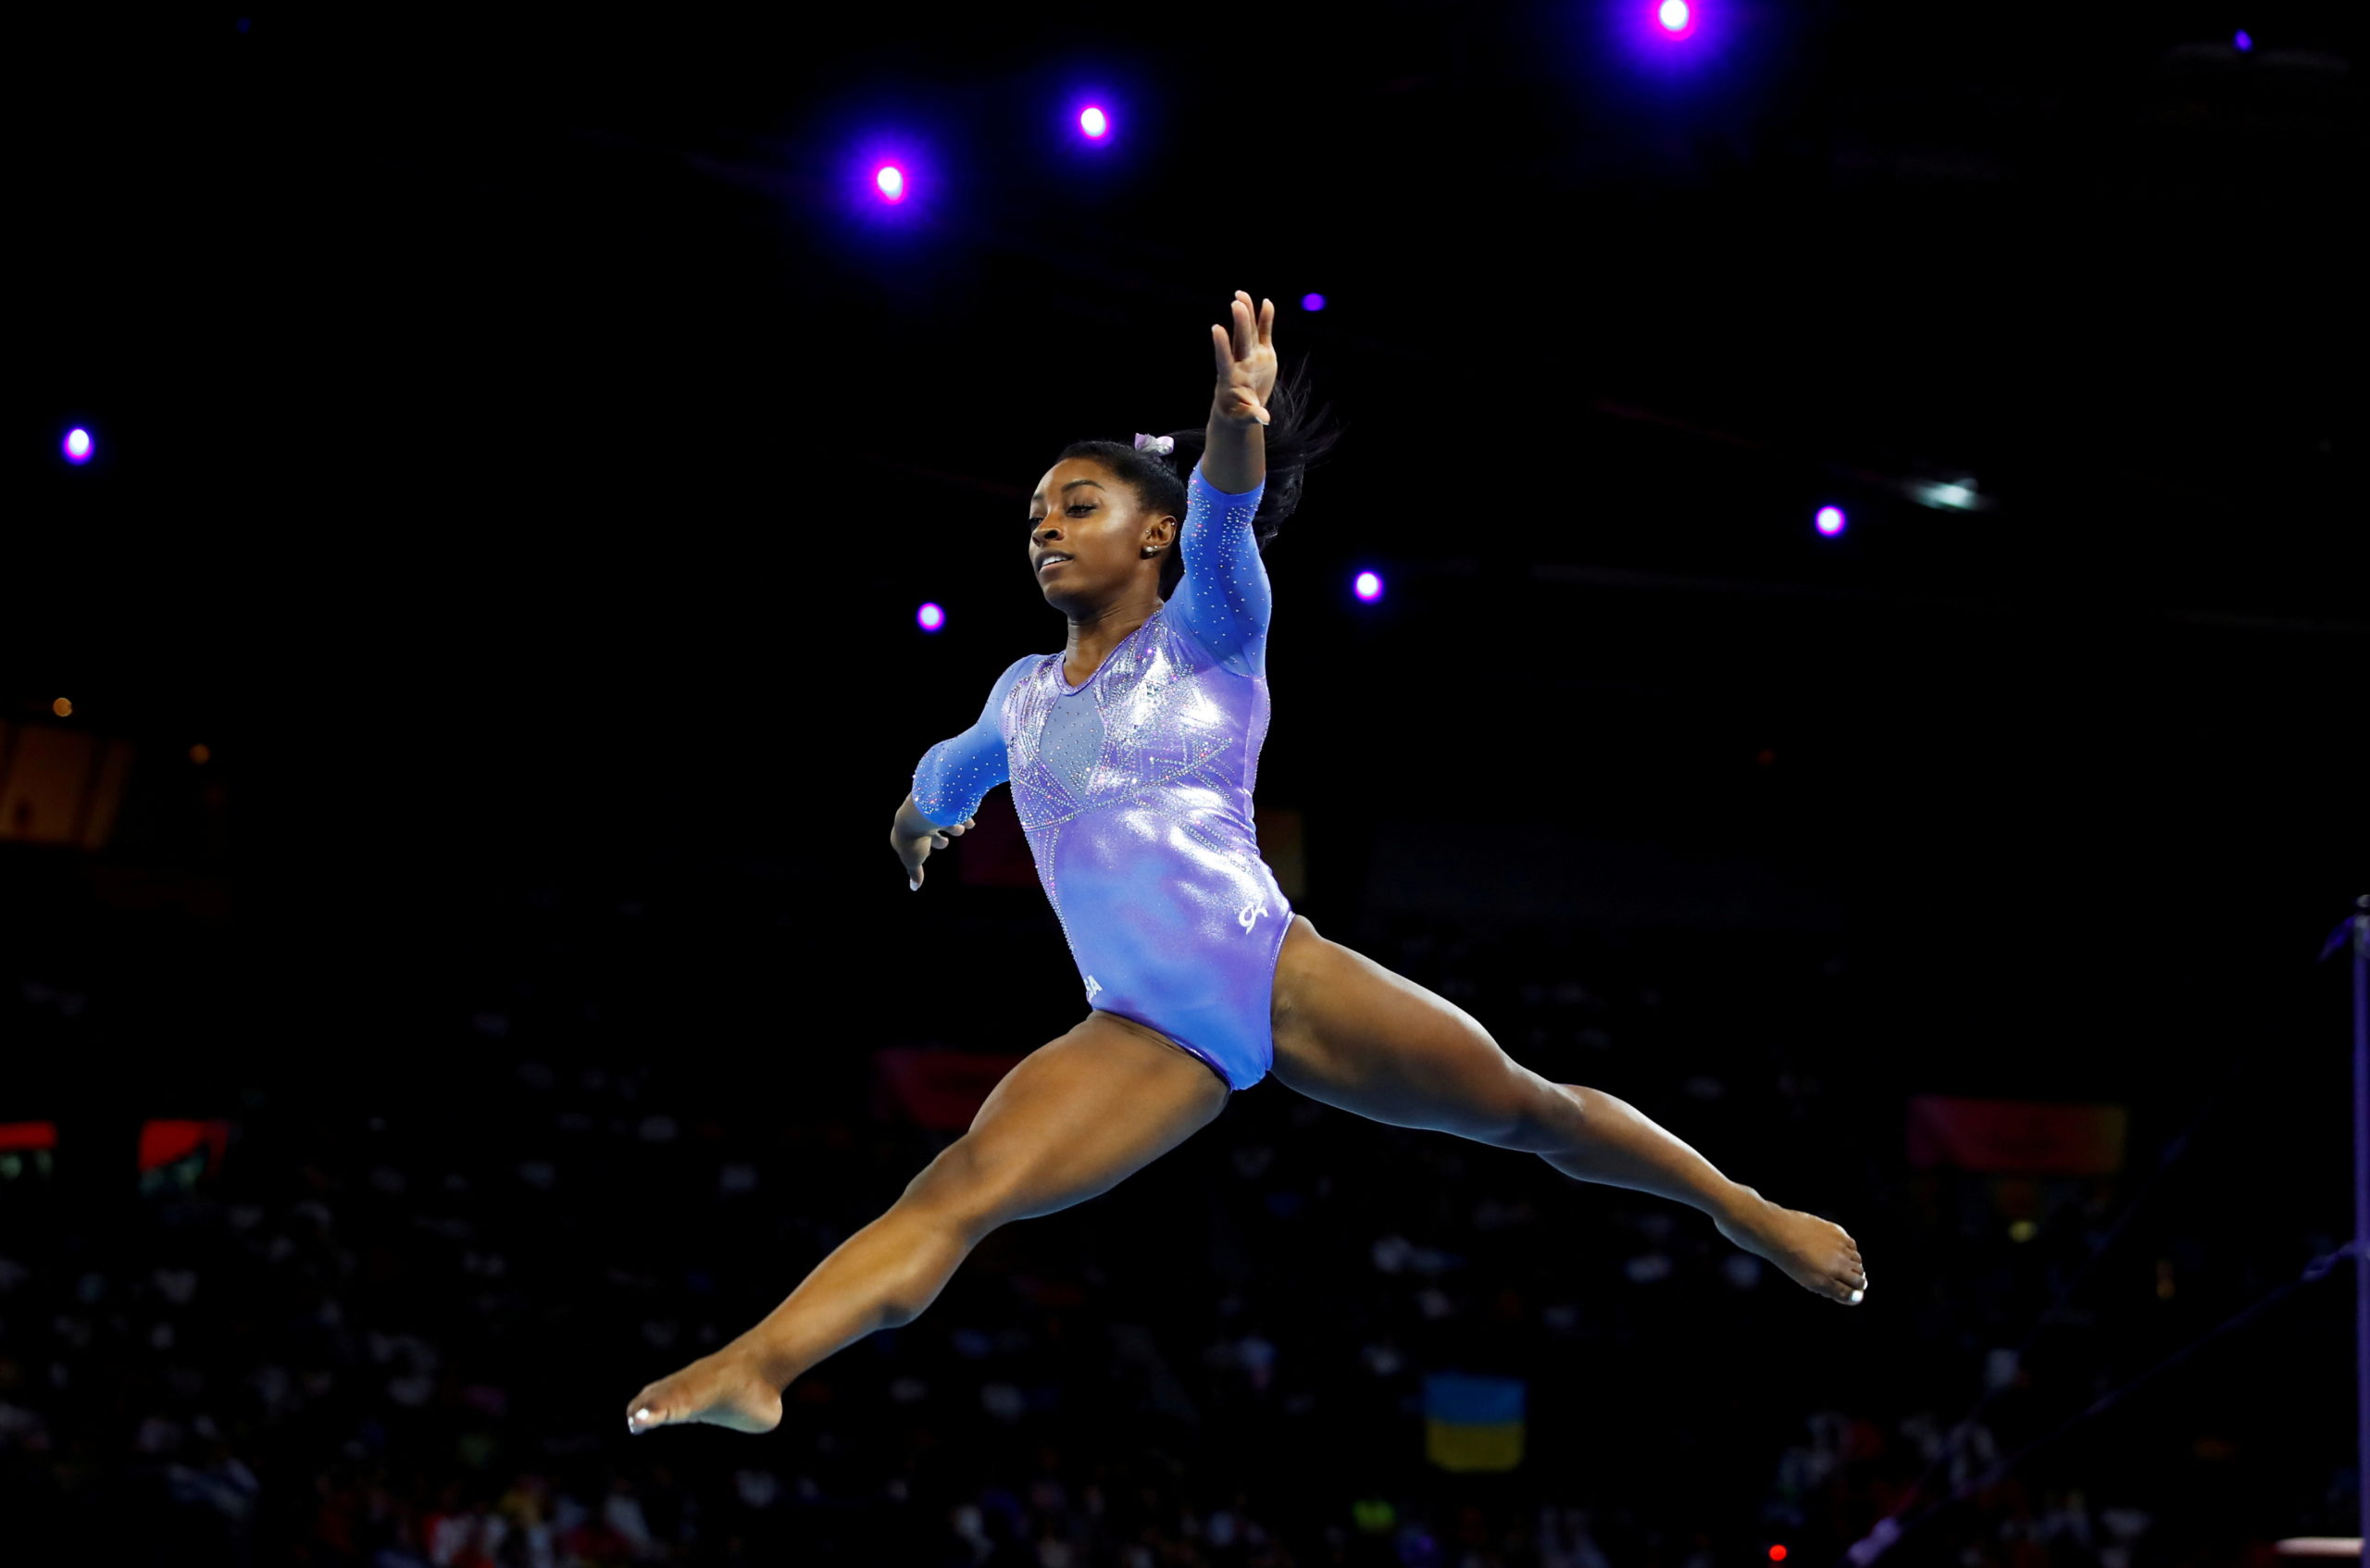 FILE PHOTO: Simone Biles of the U.S. in action - Artistic Gymnastics - 2019 World Artistic Gymnastics Championships - Women's Floor Final - Hanns-Martin-Schleyer-Halle, Stuttgart, Germany - October 13, 2019 REUTERS/Wolfgang Rattay/File Photo/File Photo